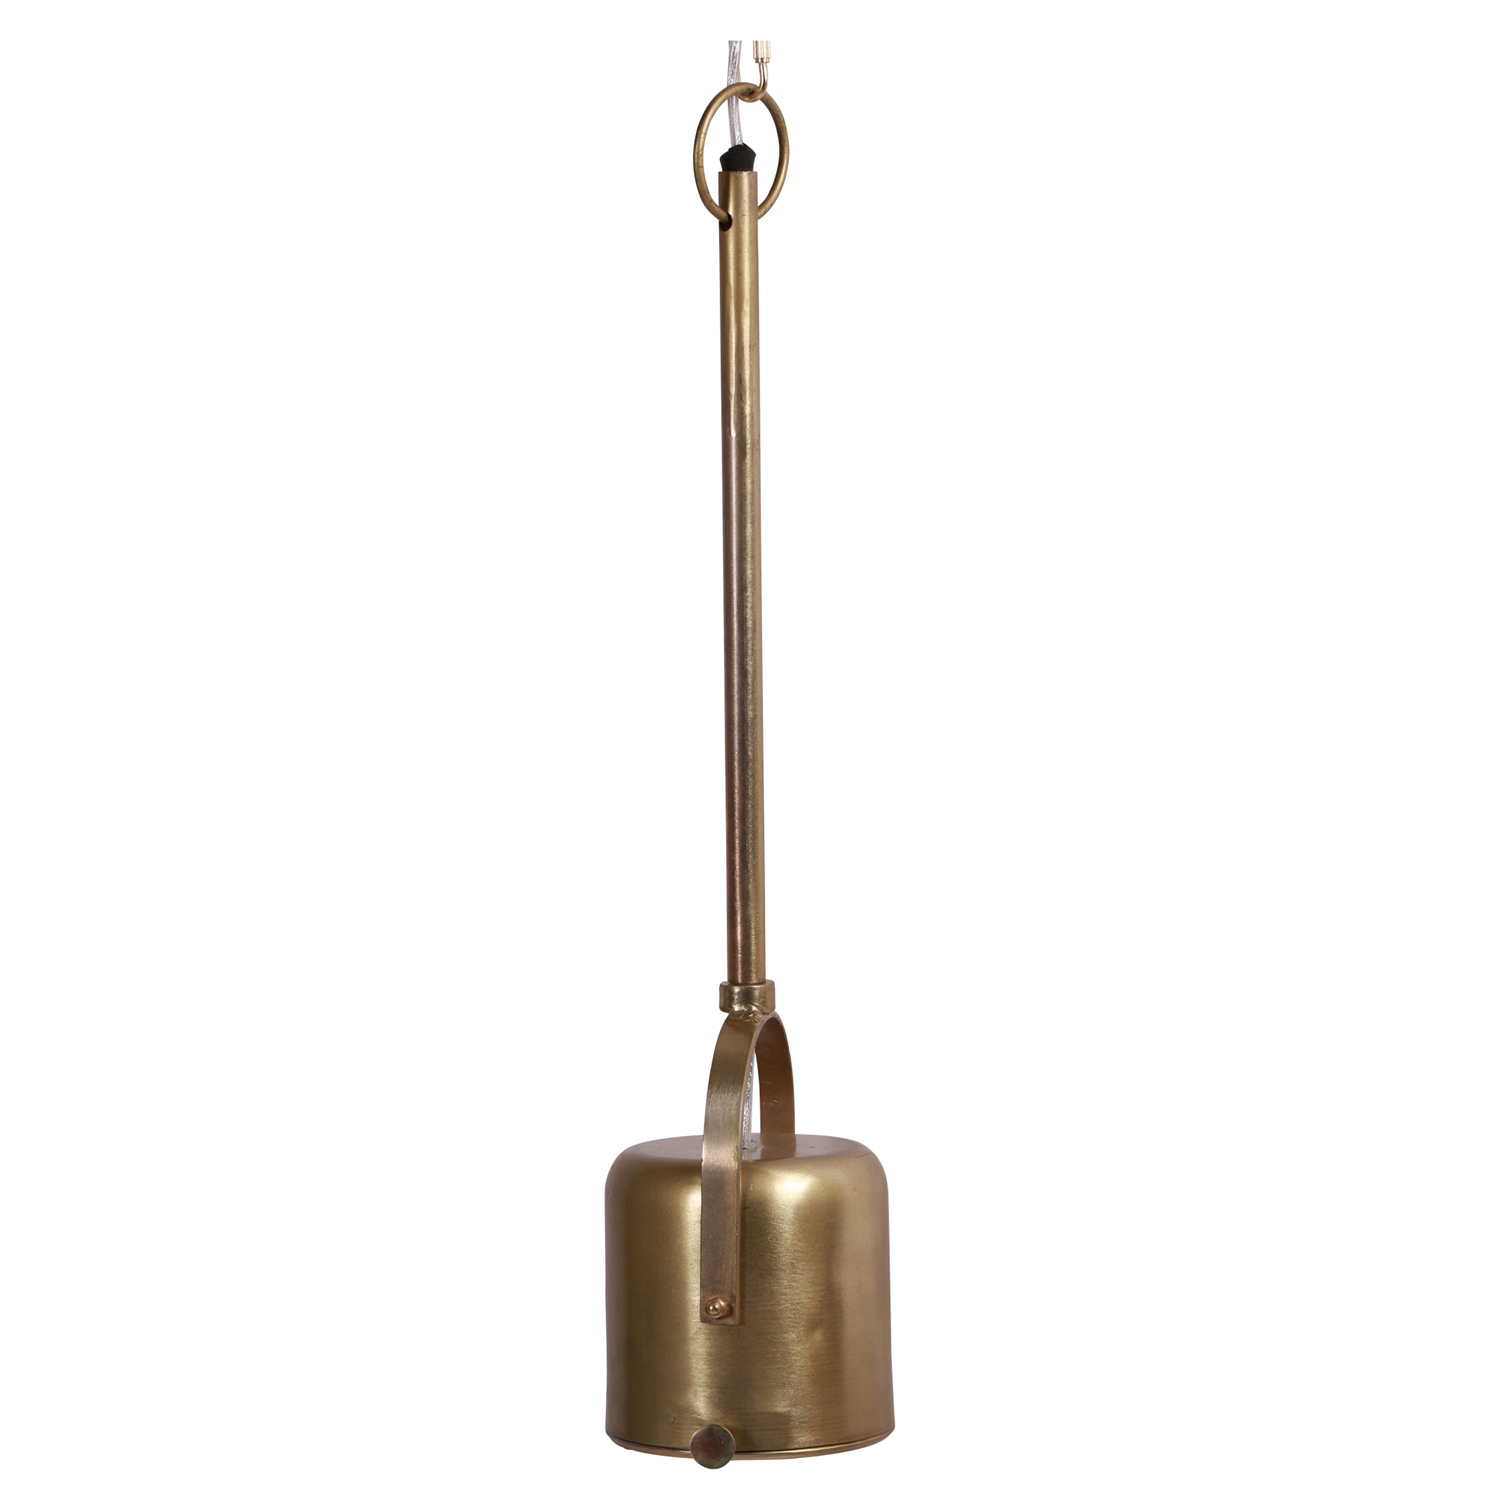 Ren-Wil Roselle Ceiling Fixture - Brass Plated